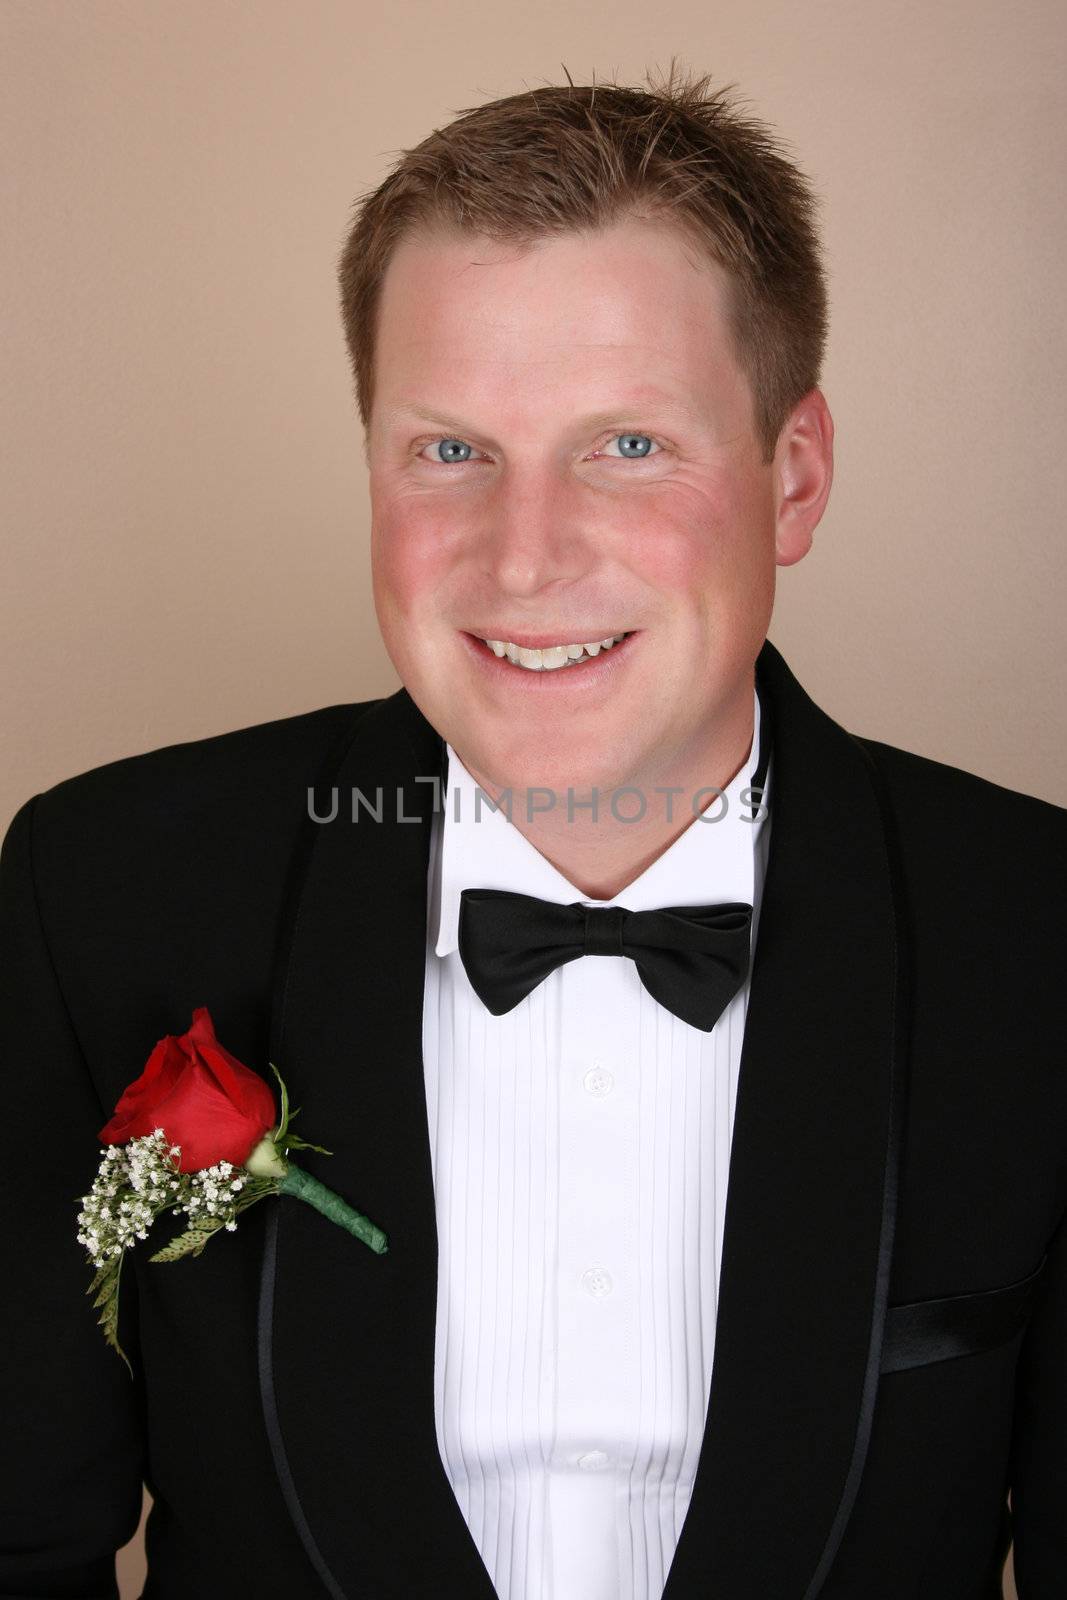 Smiling groom on his wedding day wearing a red rose corsage